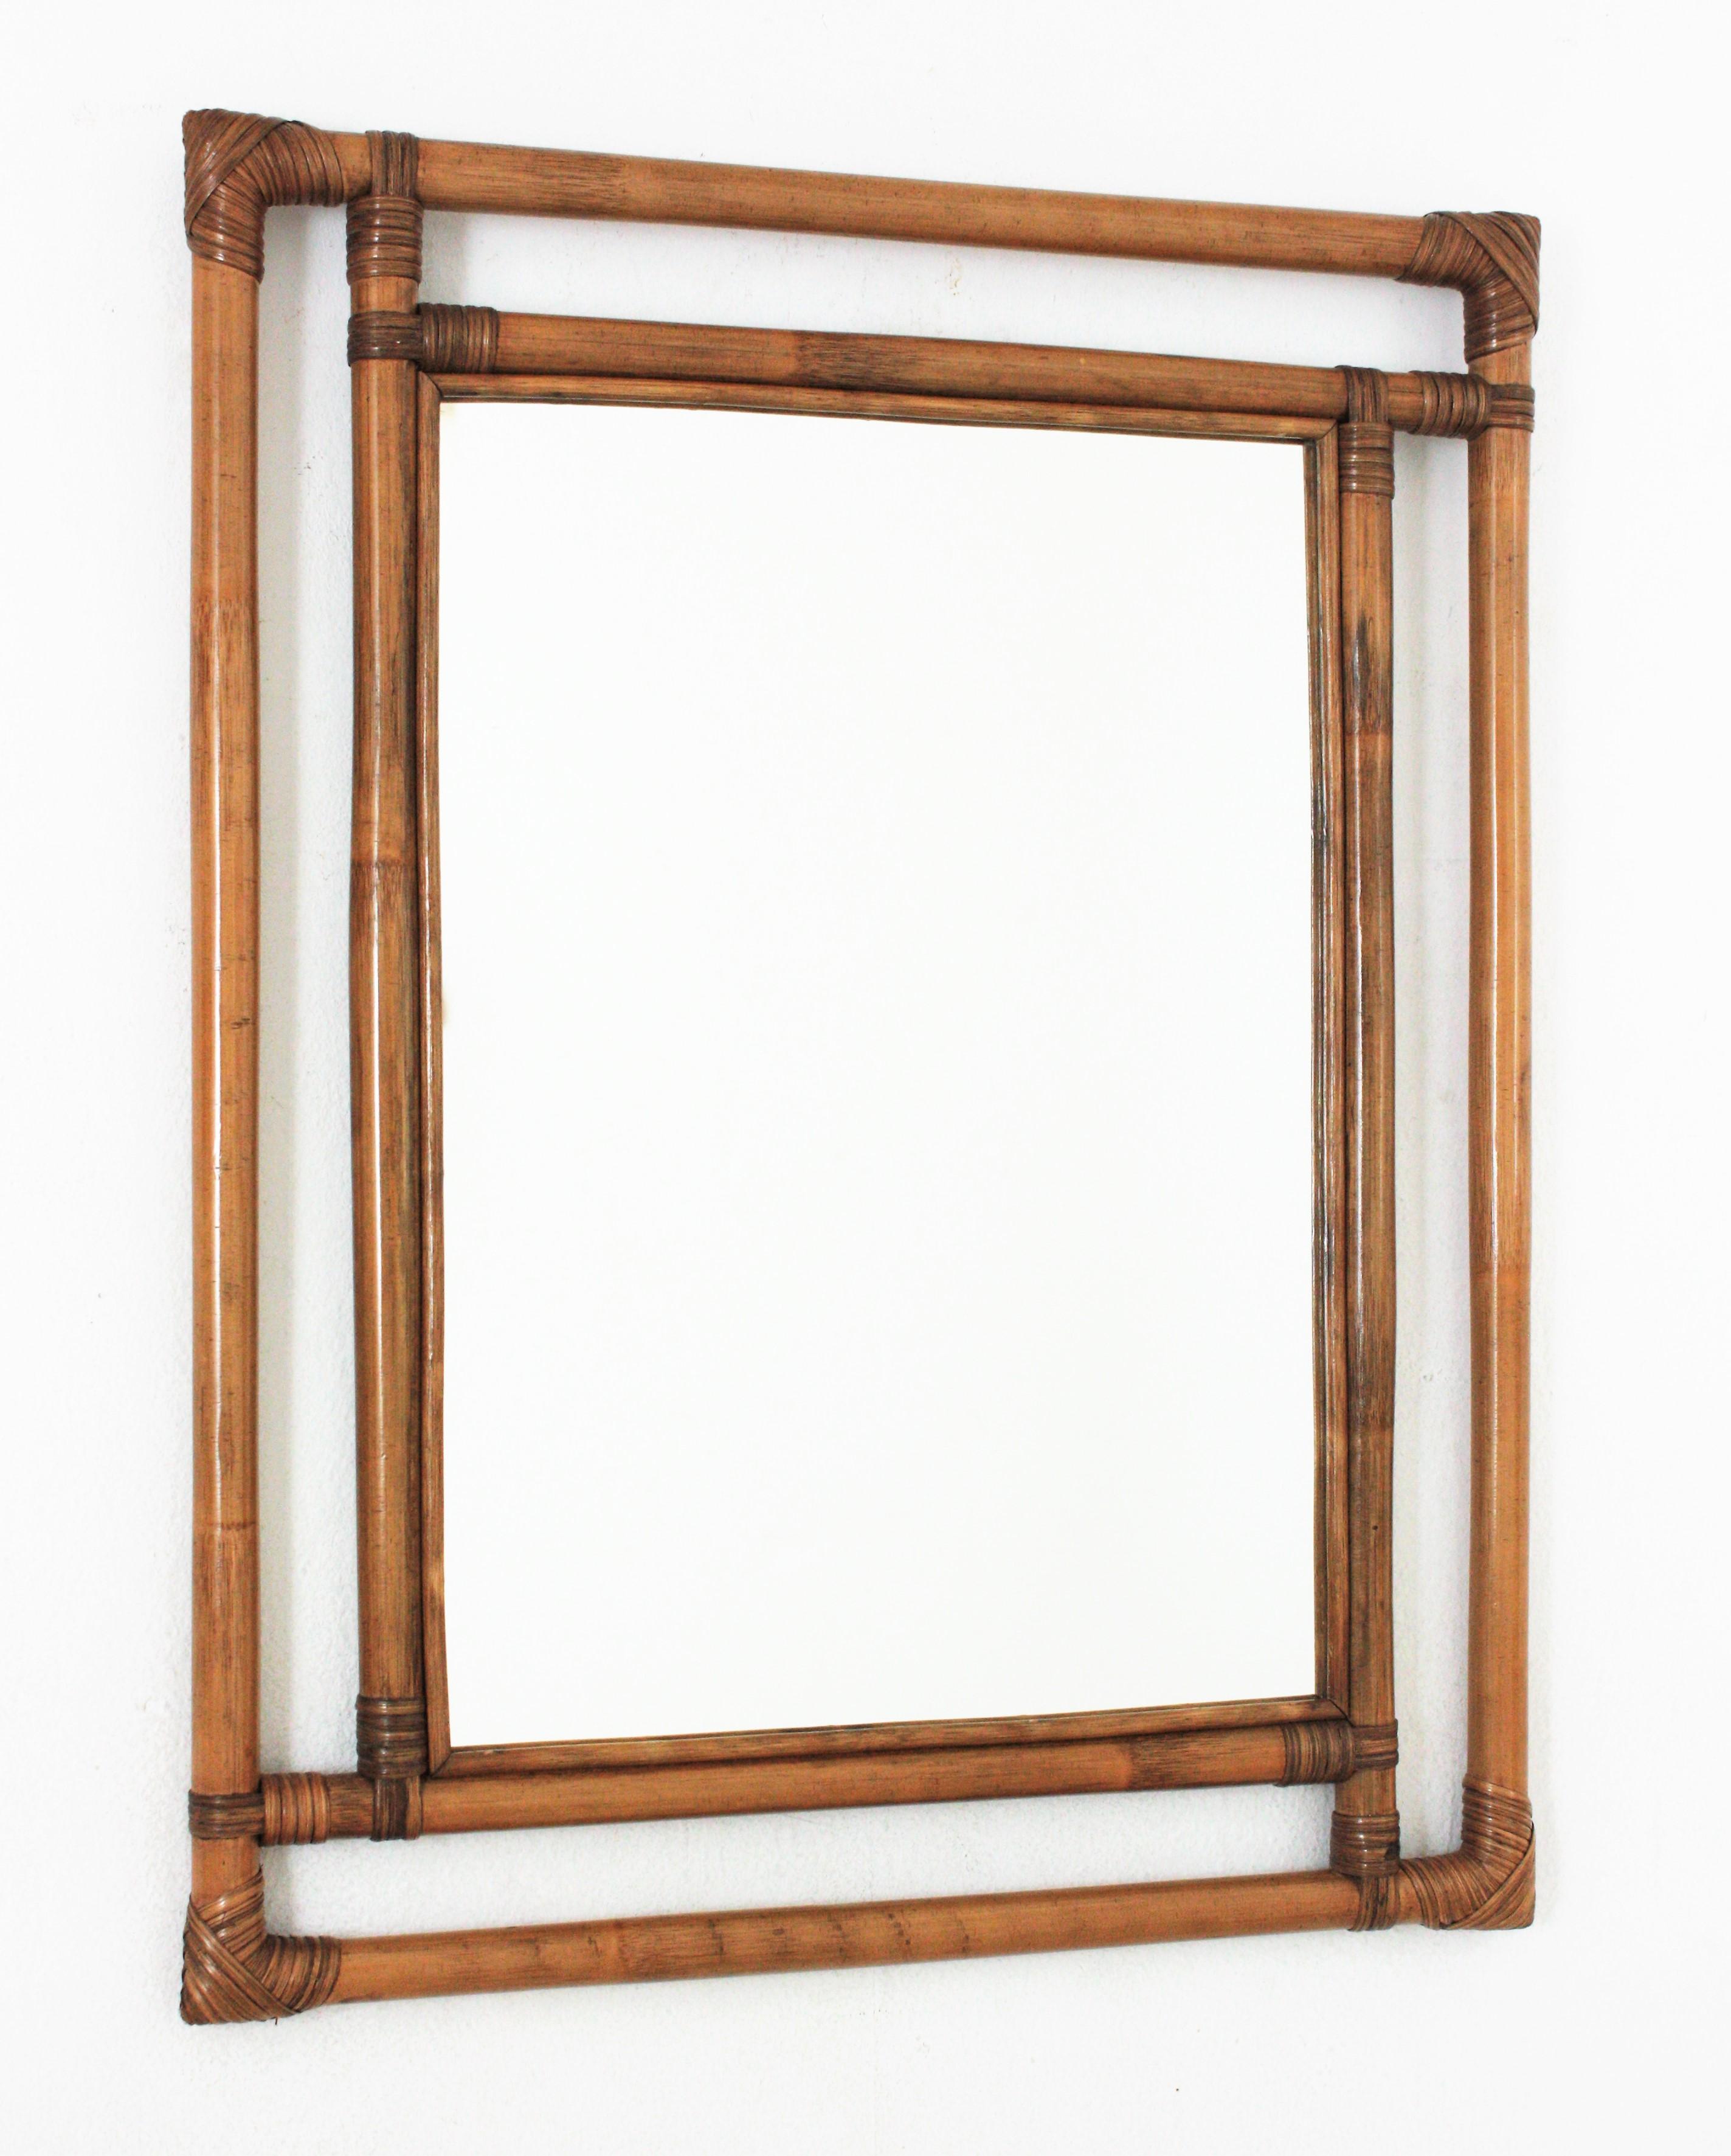 Gorgeous Tiki style rectangular mirror handcrafted with bamboo cane. Spain, 1960s.
Highly decorative handcrafted bamboo frame with geometric shapes, oriental accents and a large glass surface,
This mirror is in excellent vintage condition.
It will